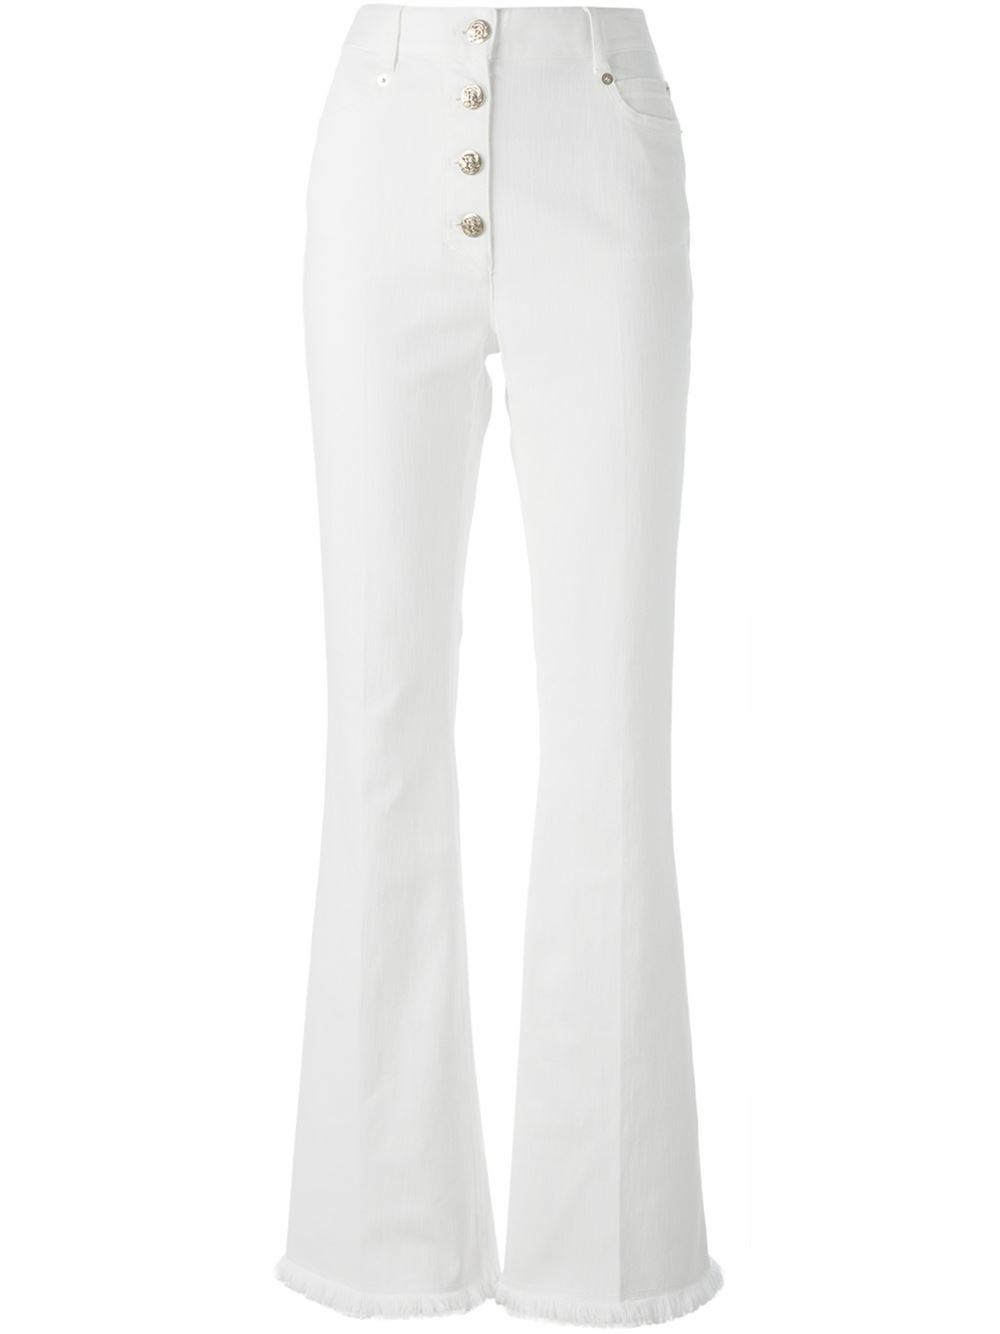 Sonia rykiel Highwaisted Flared Jeans in White - Save 61% | Lyst